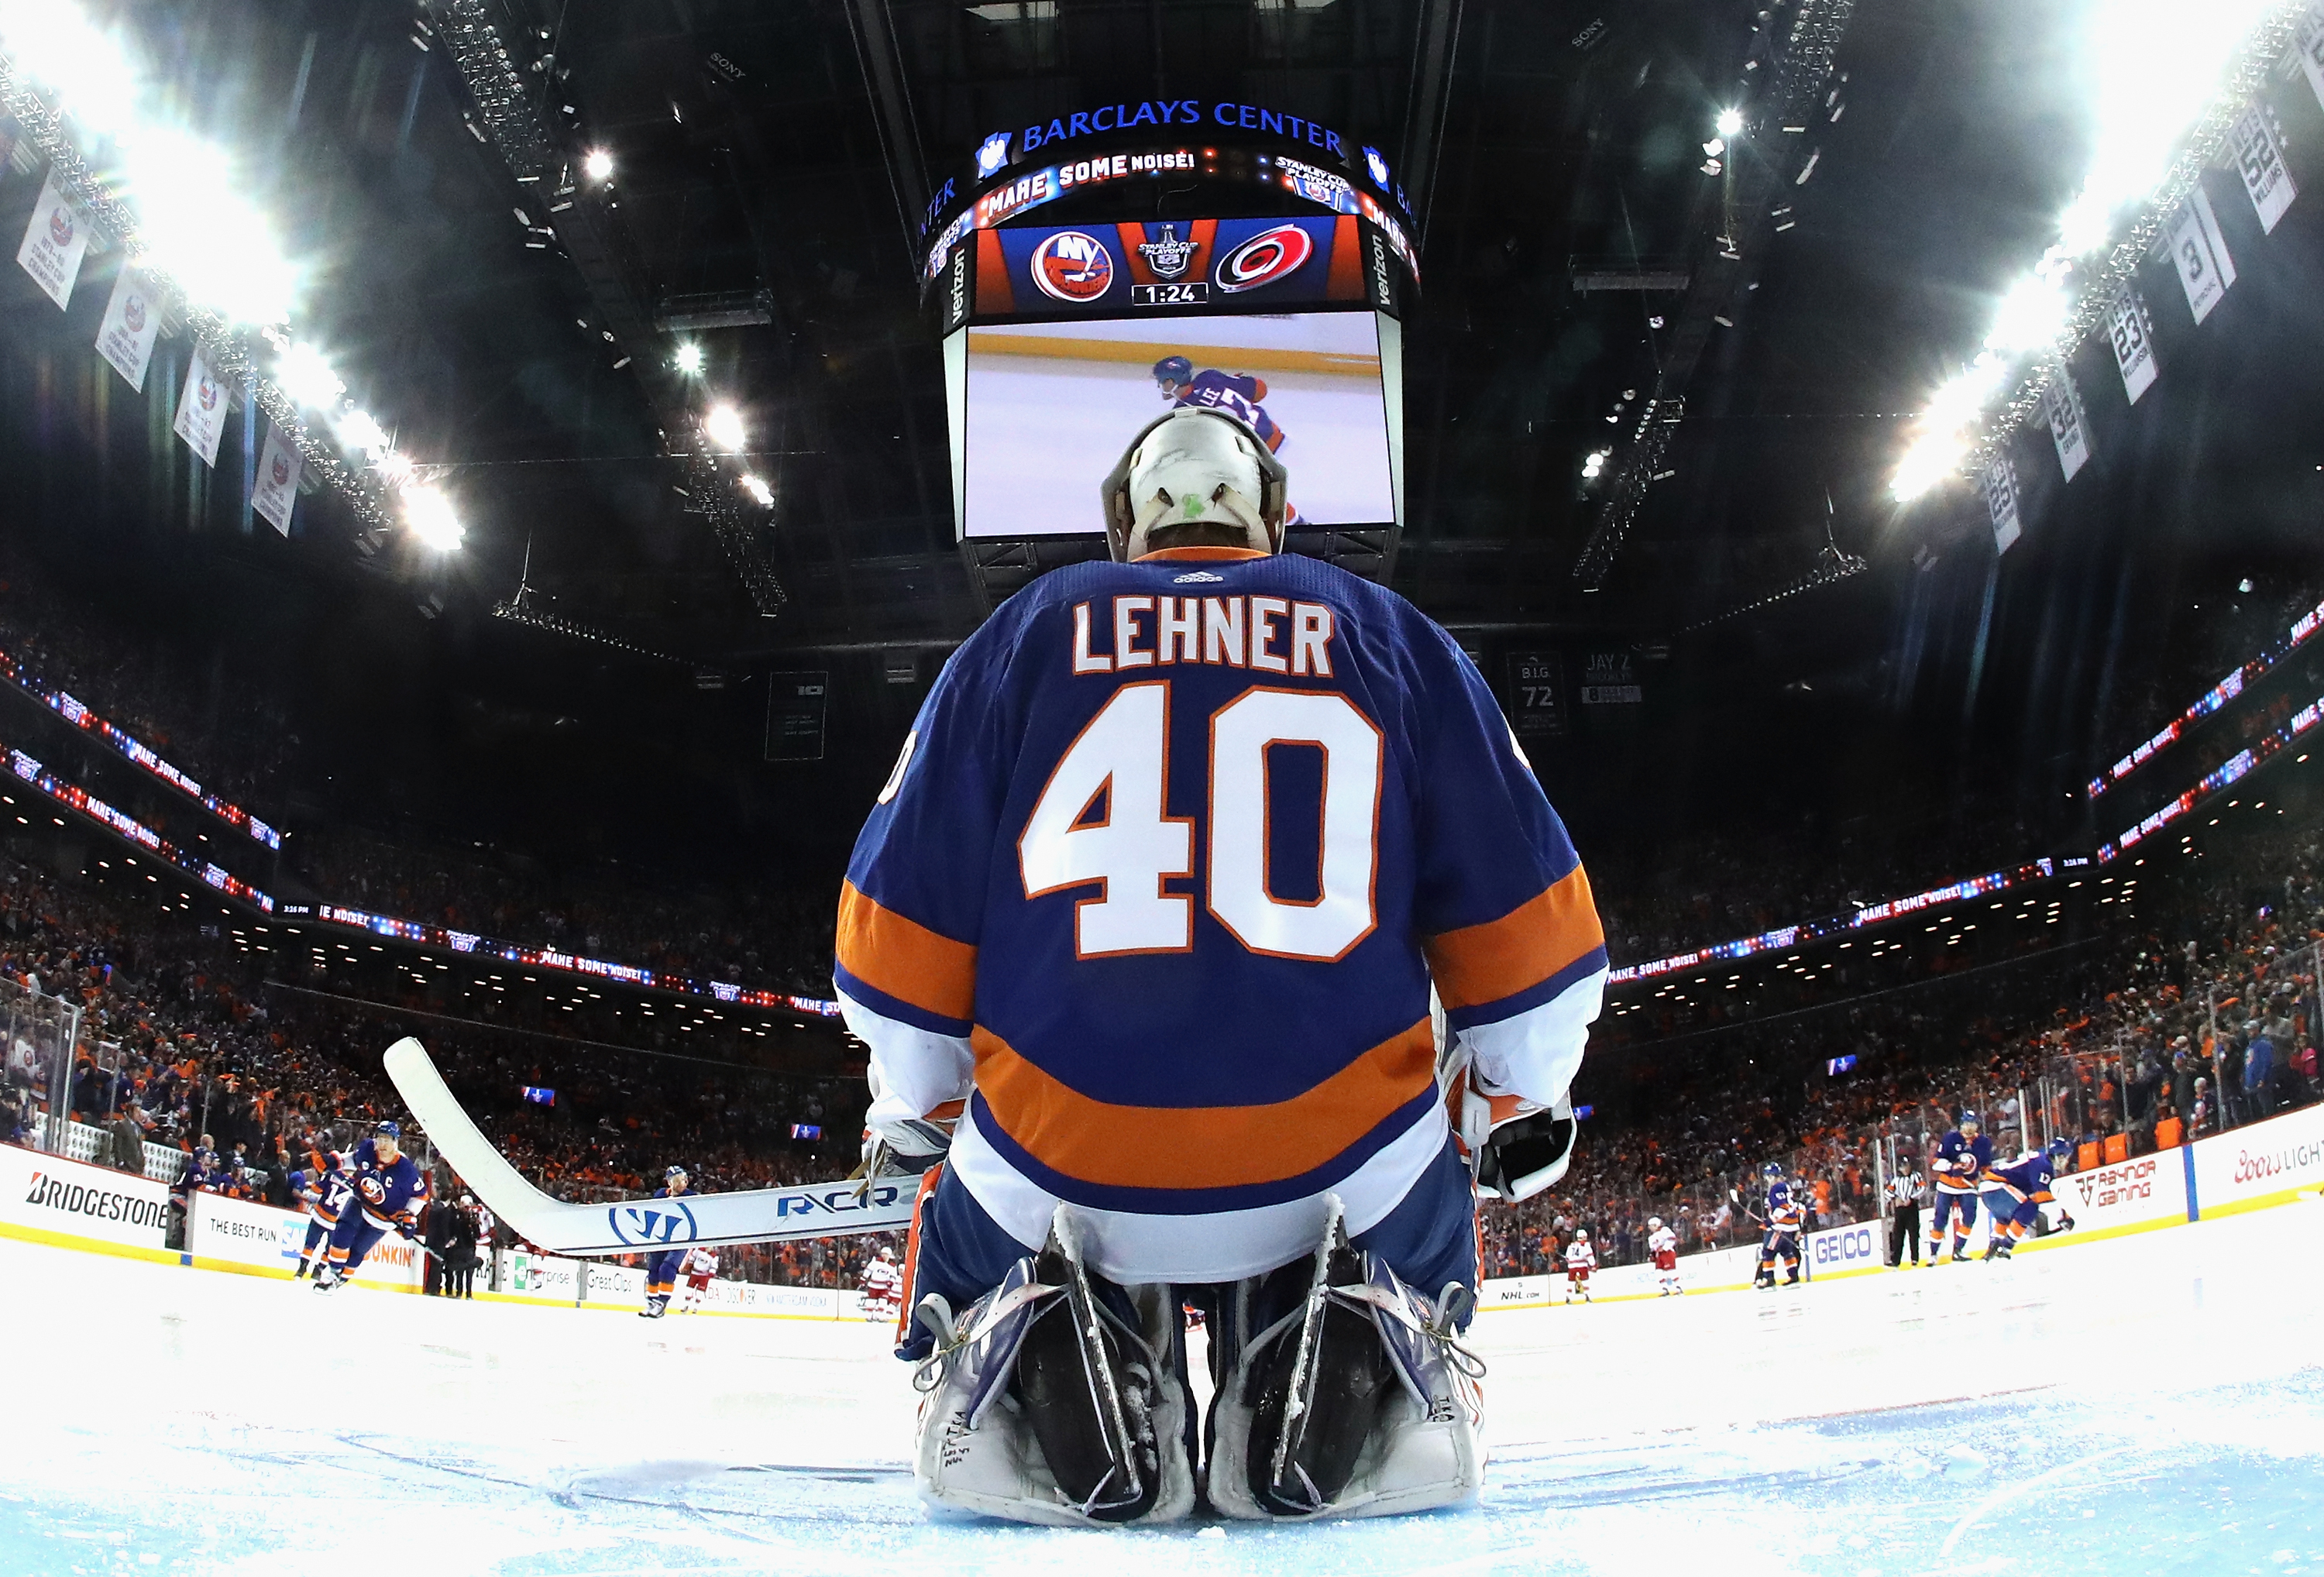 Robin Lehner of the New York Islanders poses for photos on the red